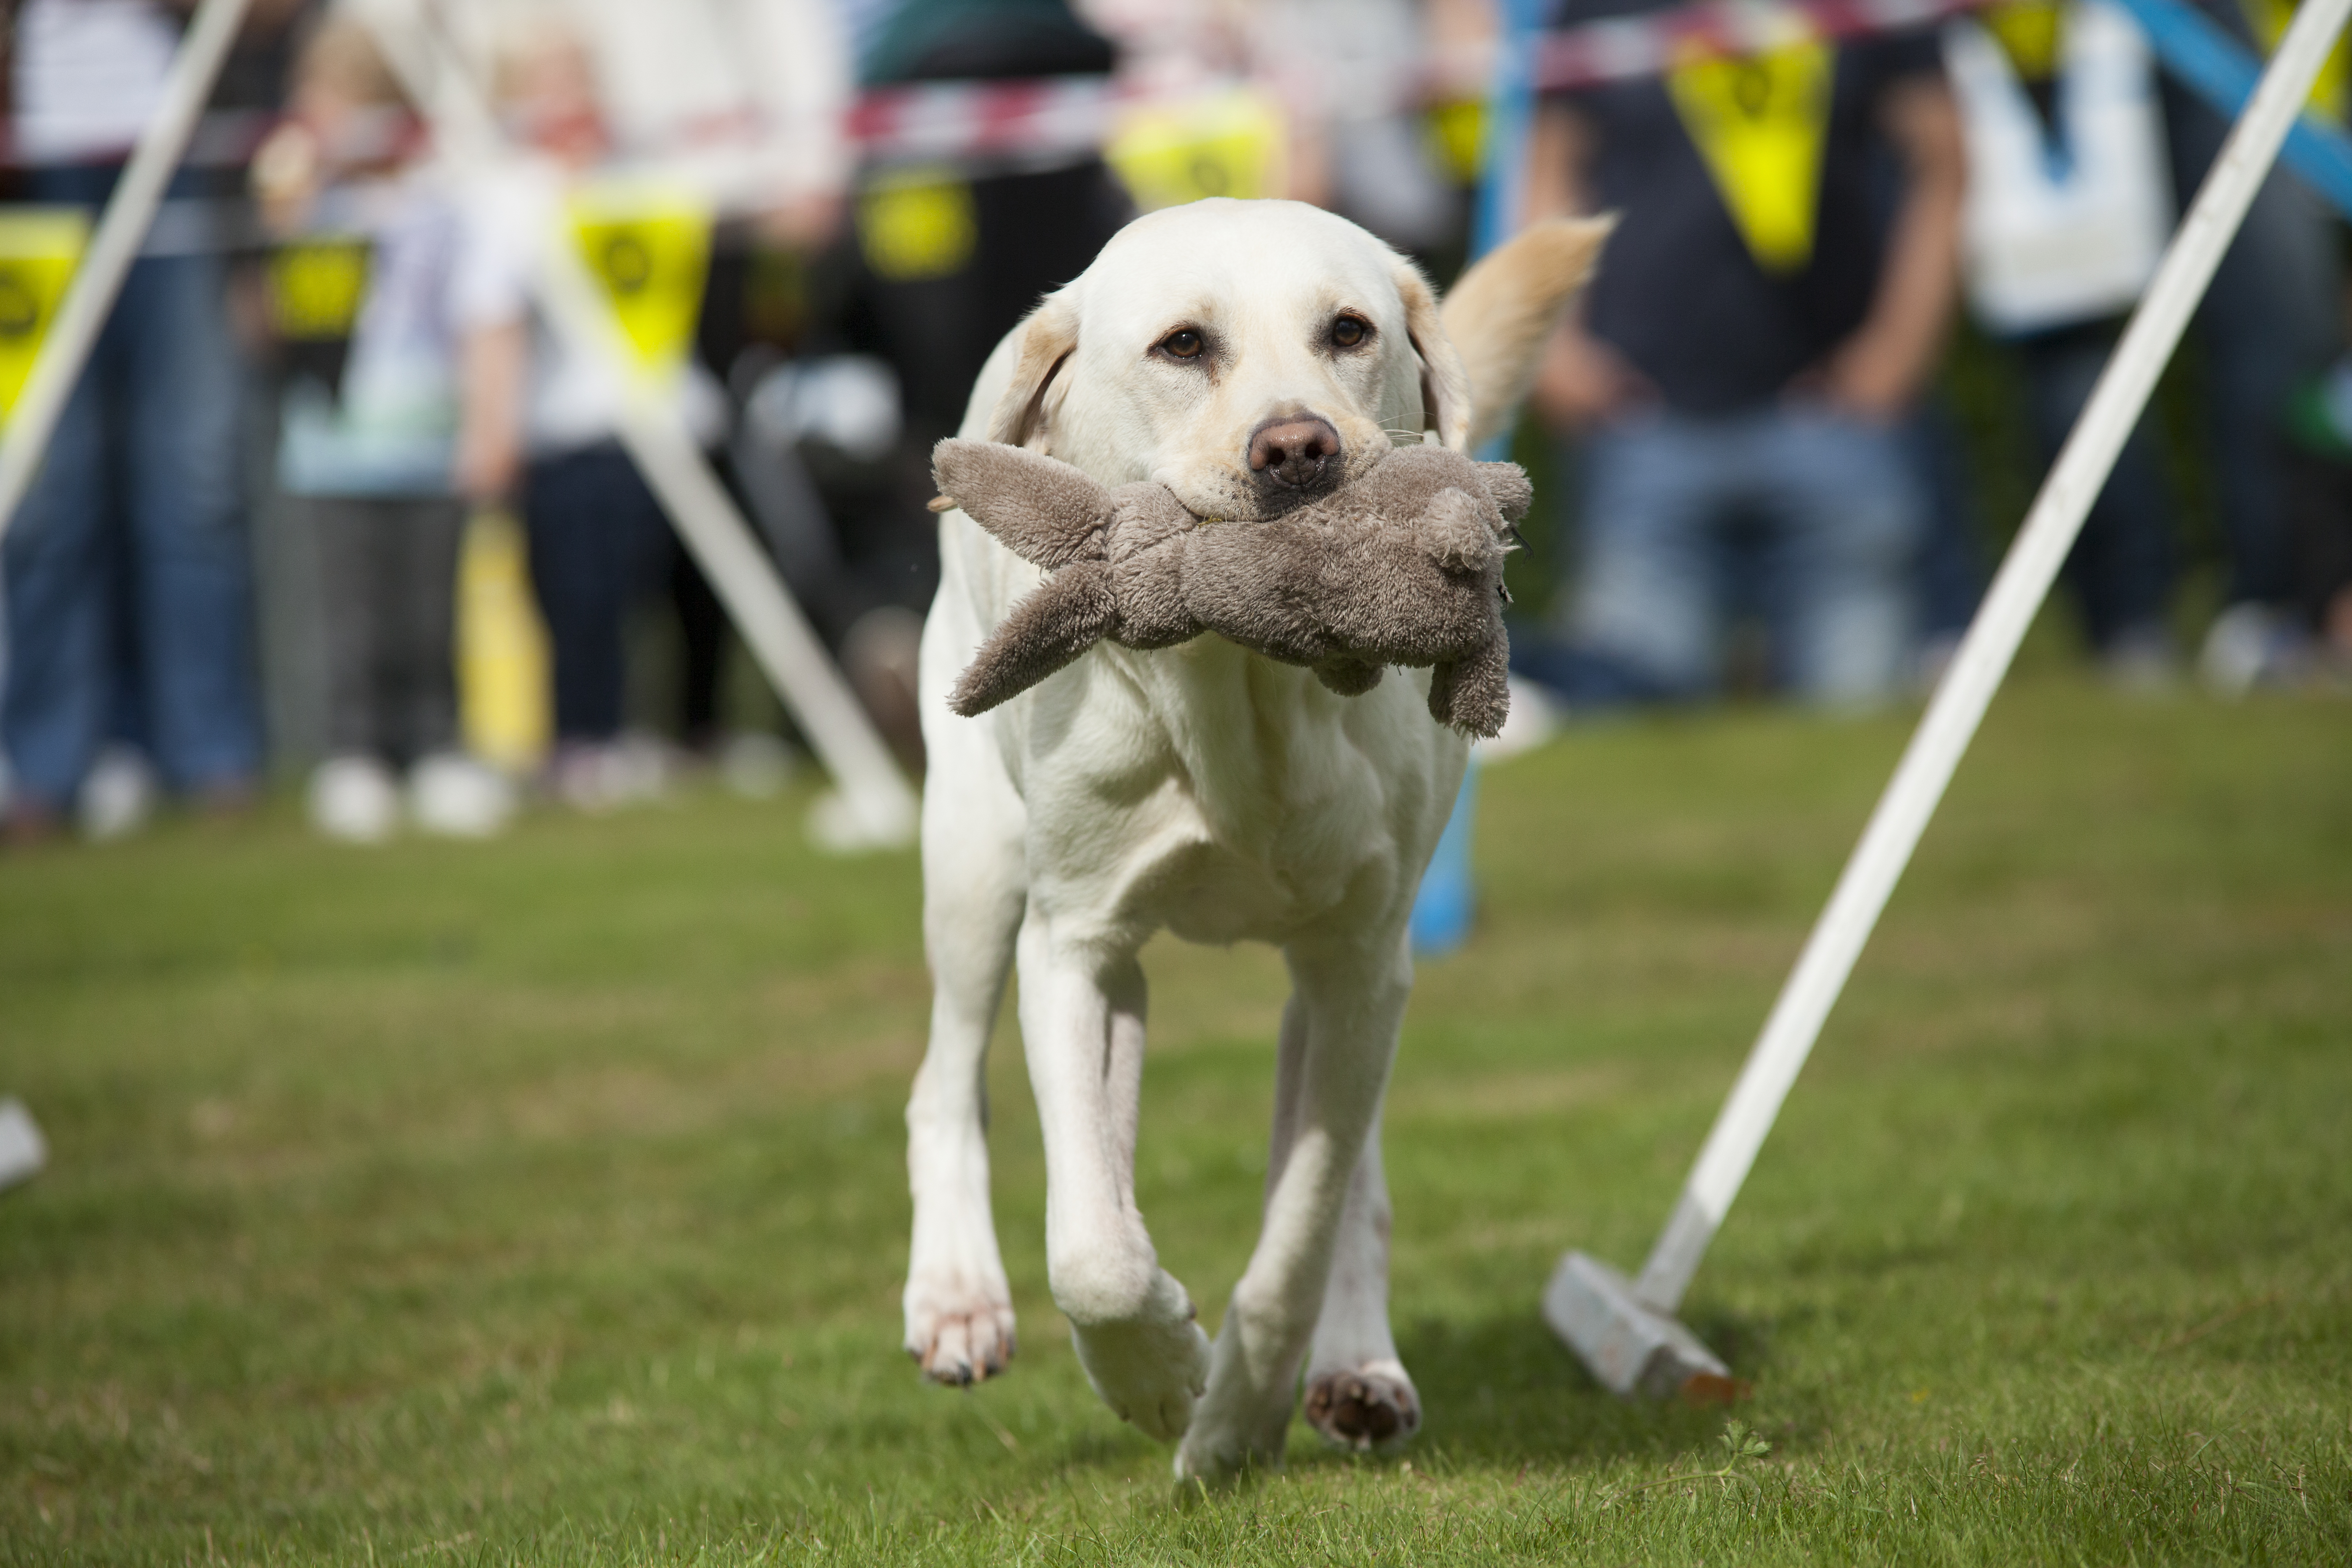 A yellow labrador trots through a field with a toy rabbit in its mouth.